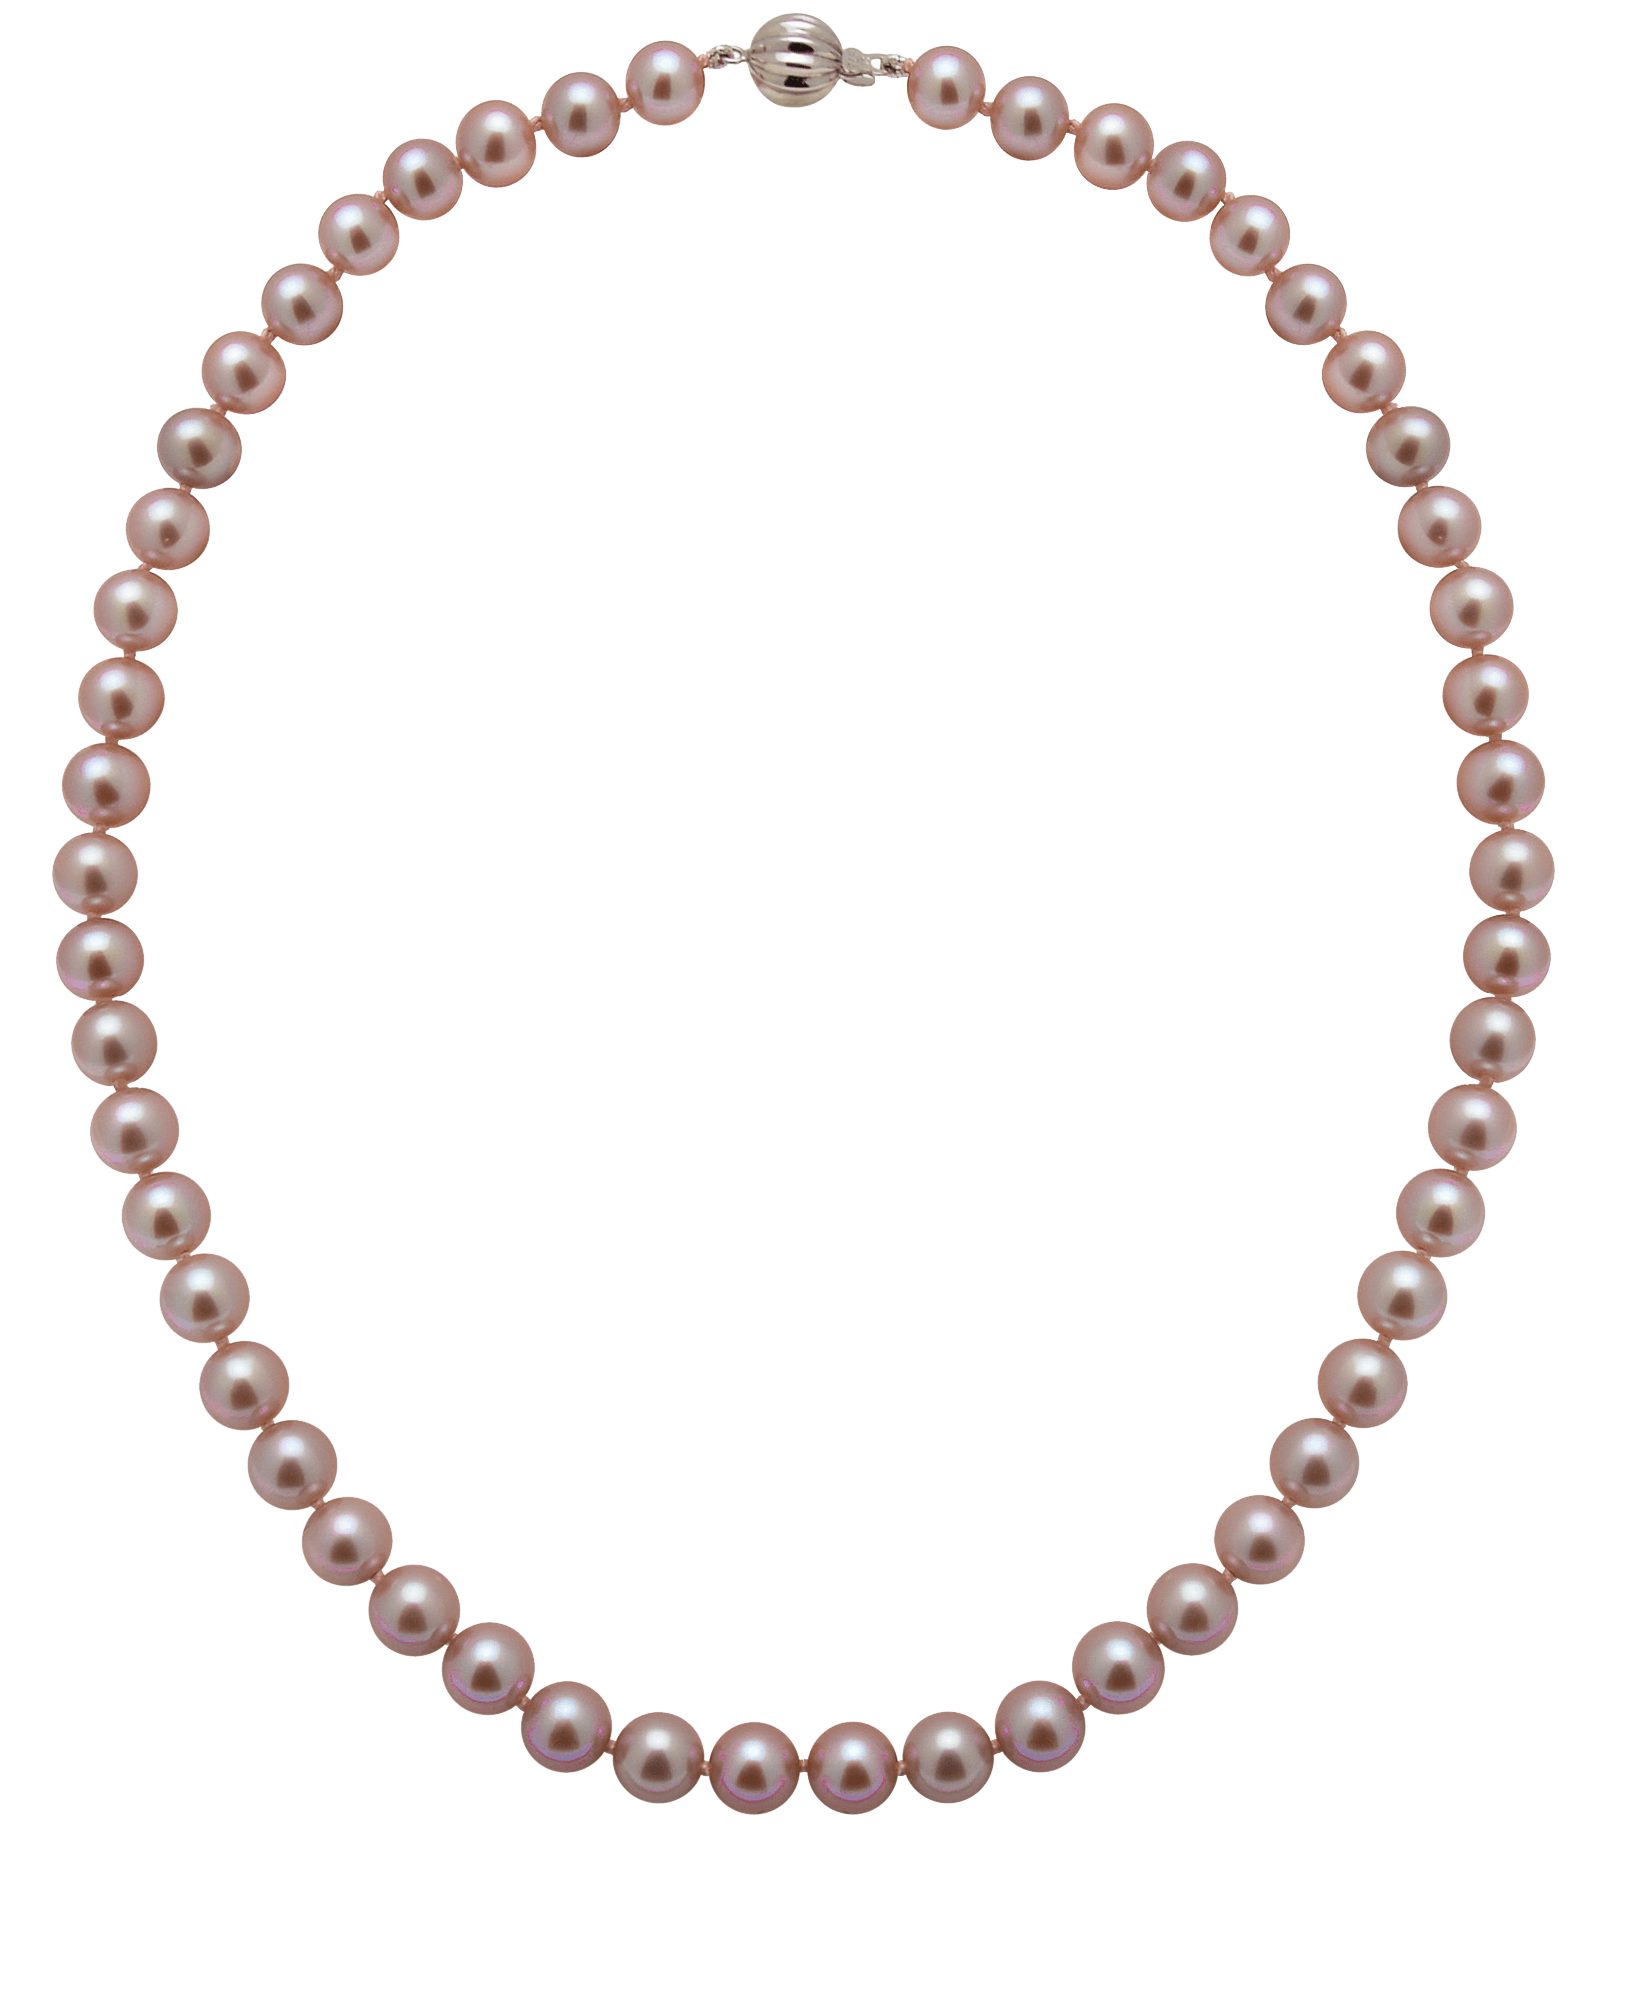 9 Freshwater Pearl Necklaces You Will Love | Classy Women Collection